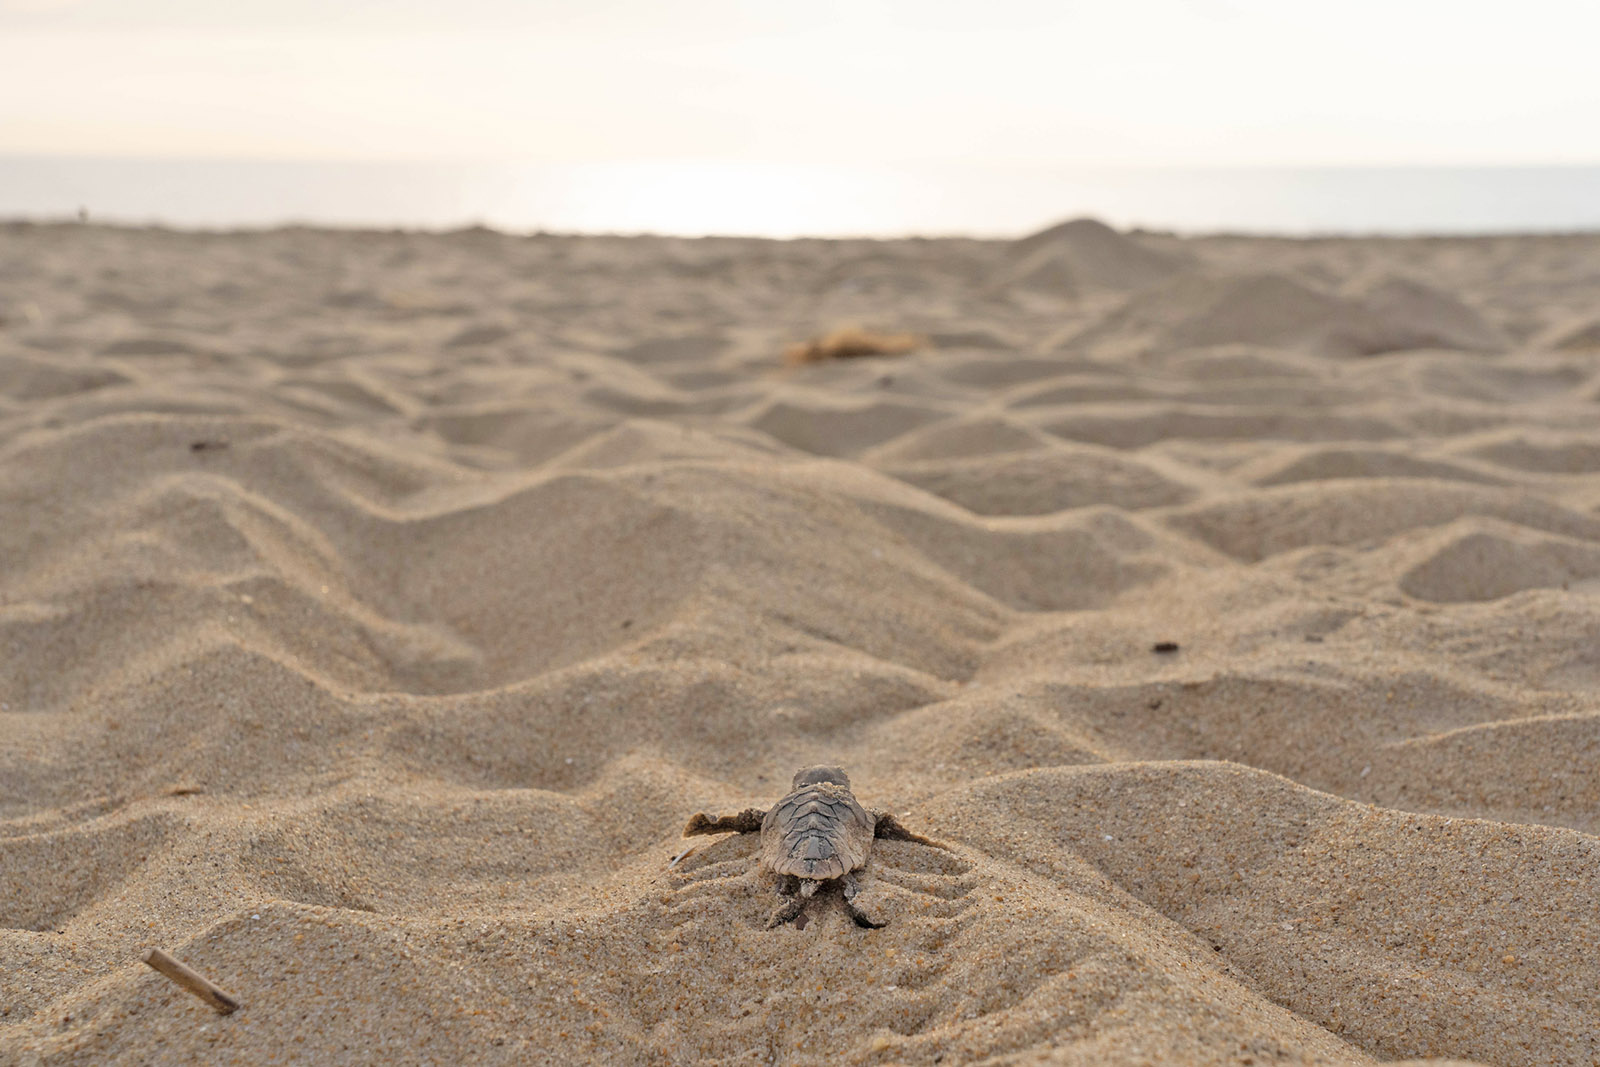 A loggerhead turtle hatchling on its way into the ocean.